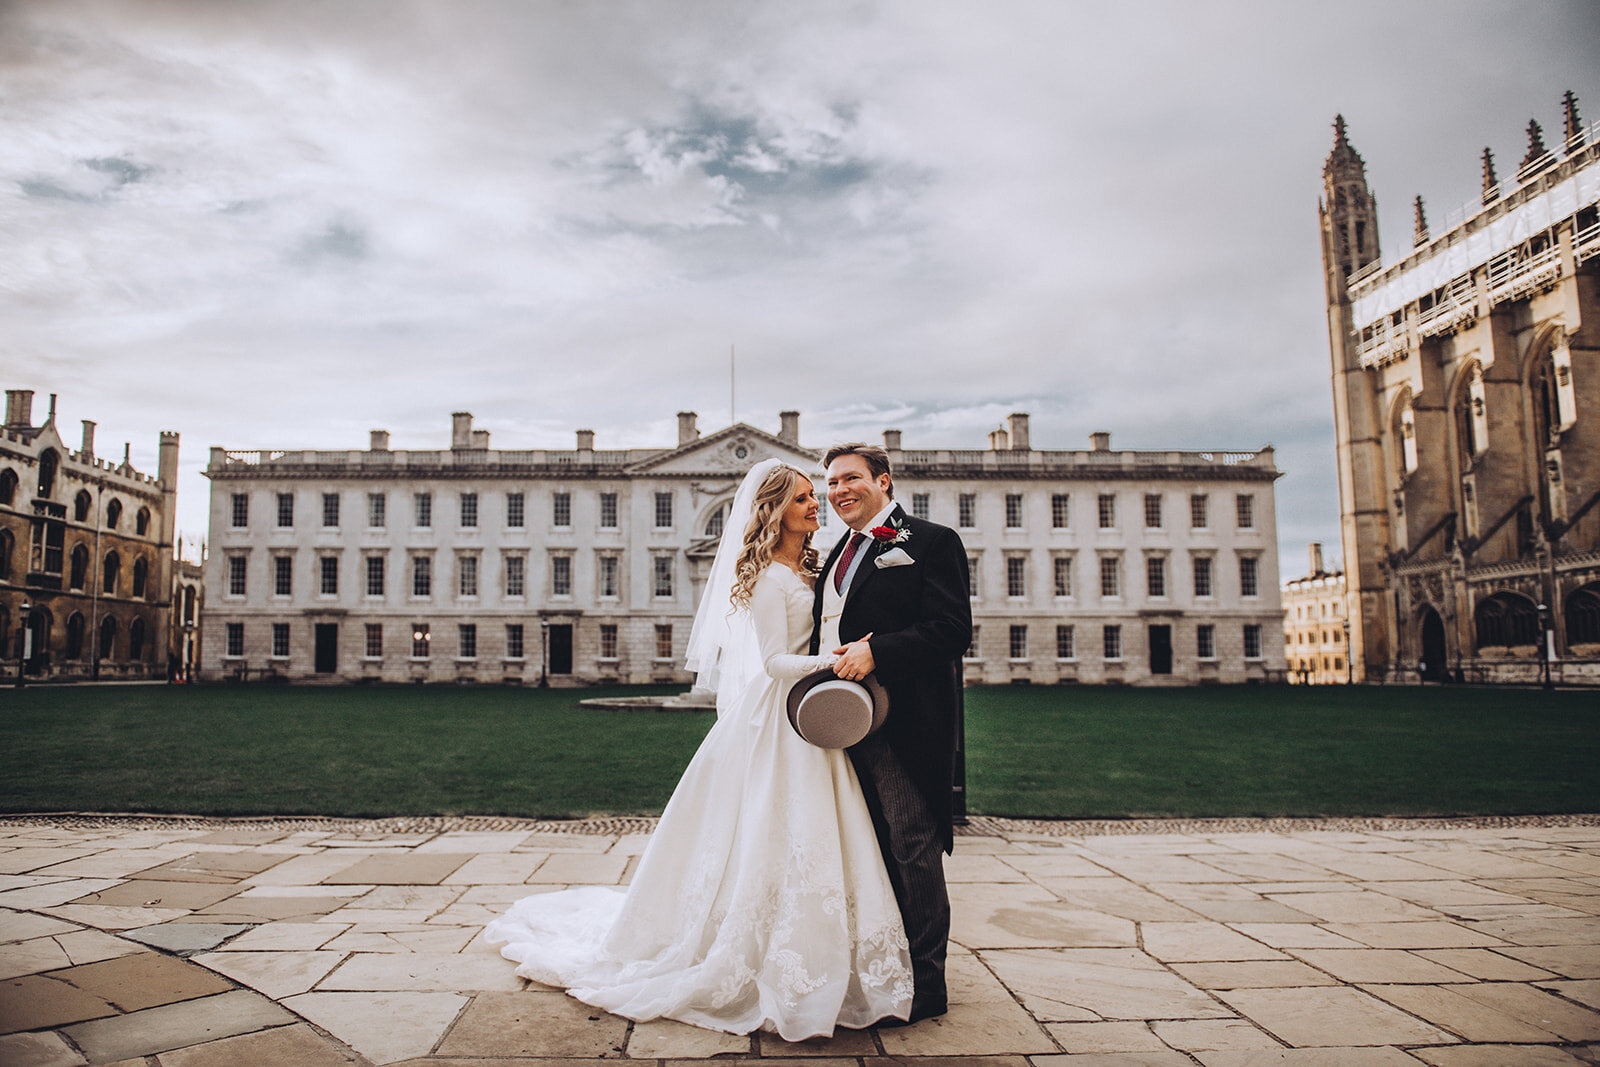 Couple standing in front of beautiful buildings at their wedding at Kings College in Cambridge